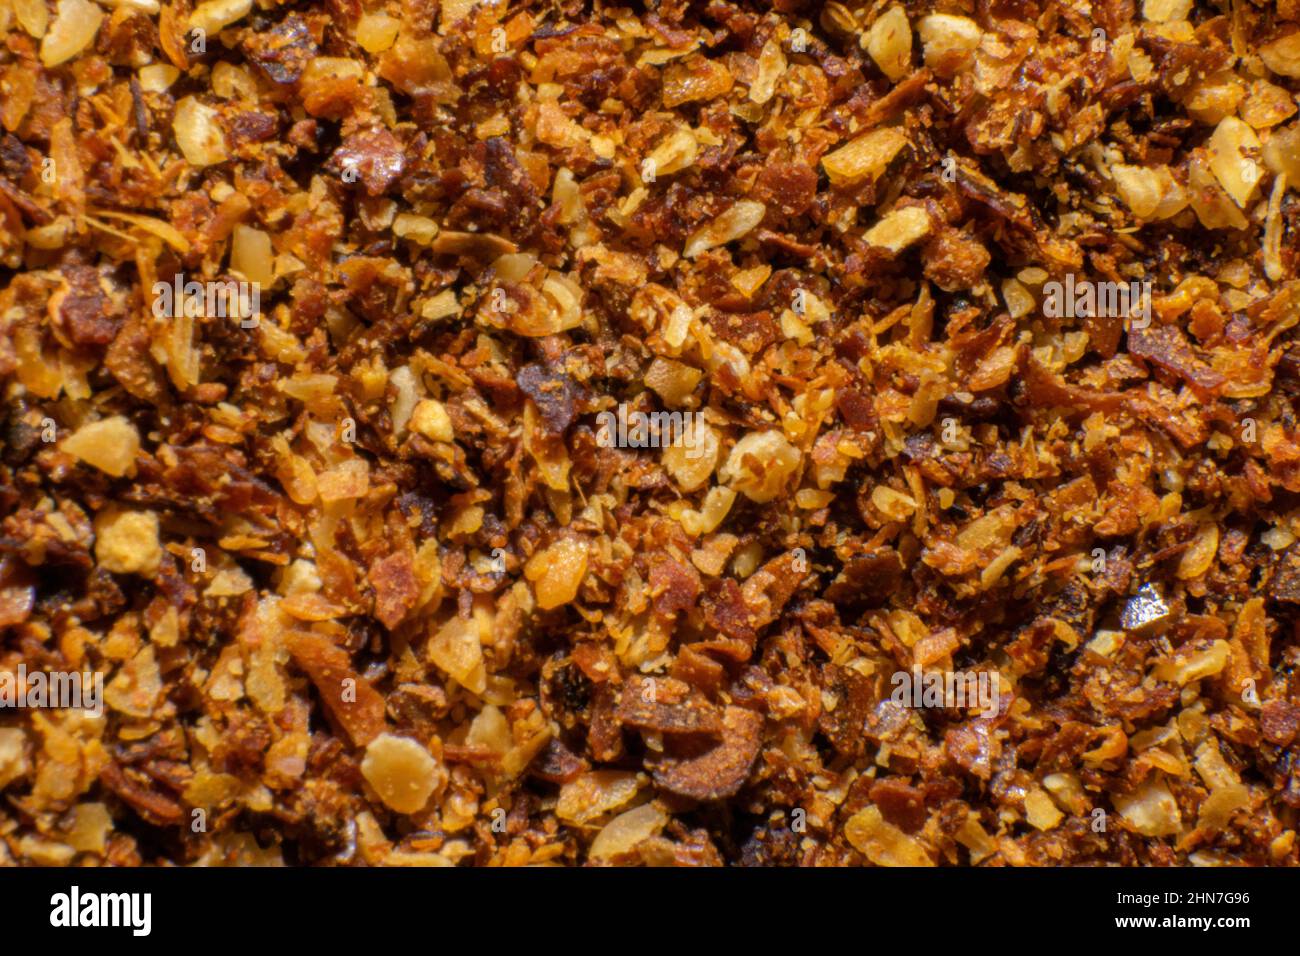 Food condiments close-up photography, flavors of cultural food. Cooking with flavor. Crushed red pepper close-up. Spicy food condiments. Stock Photo